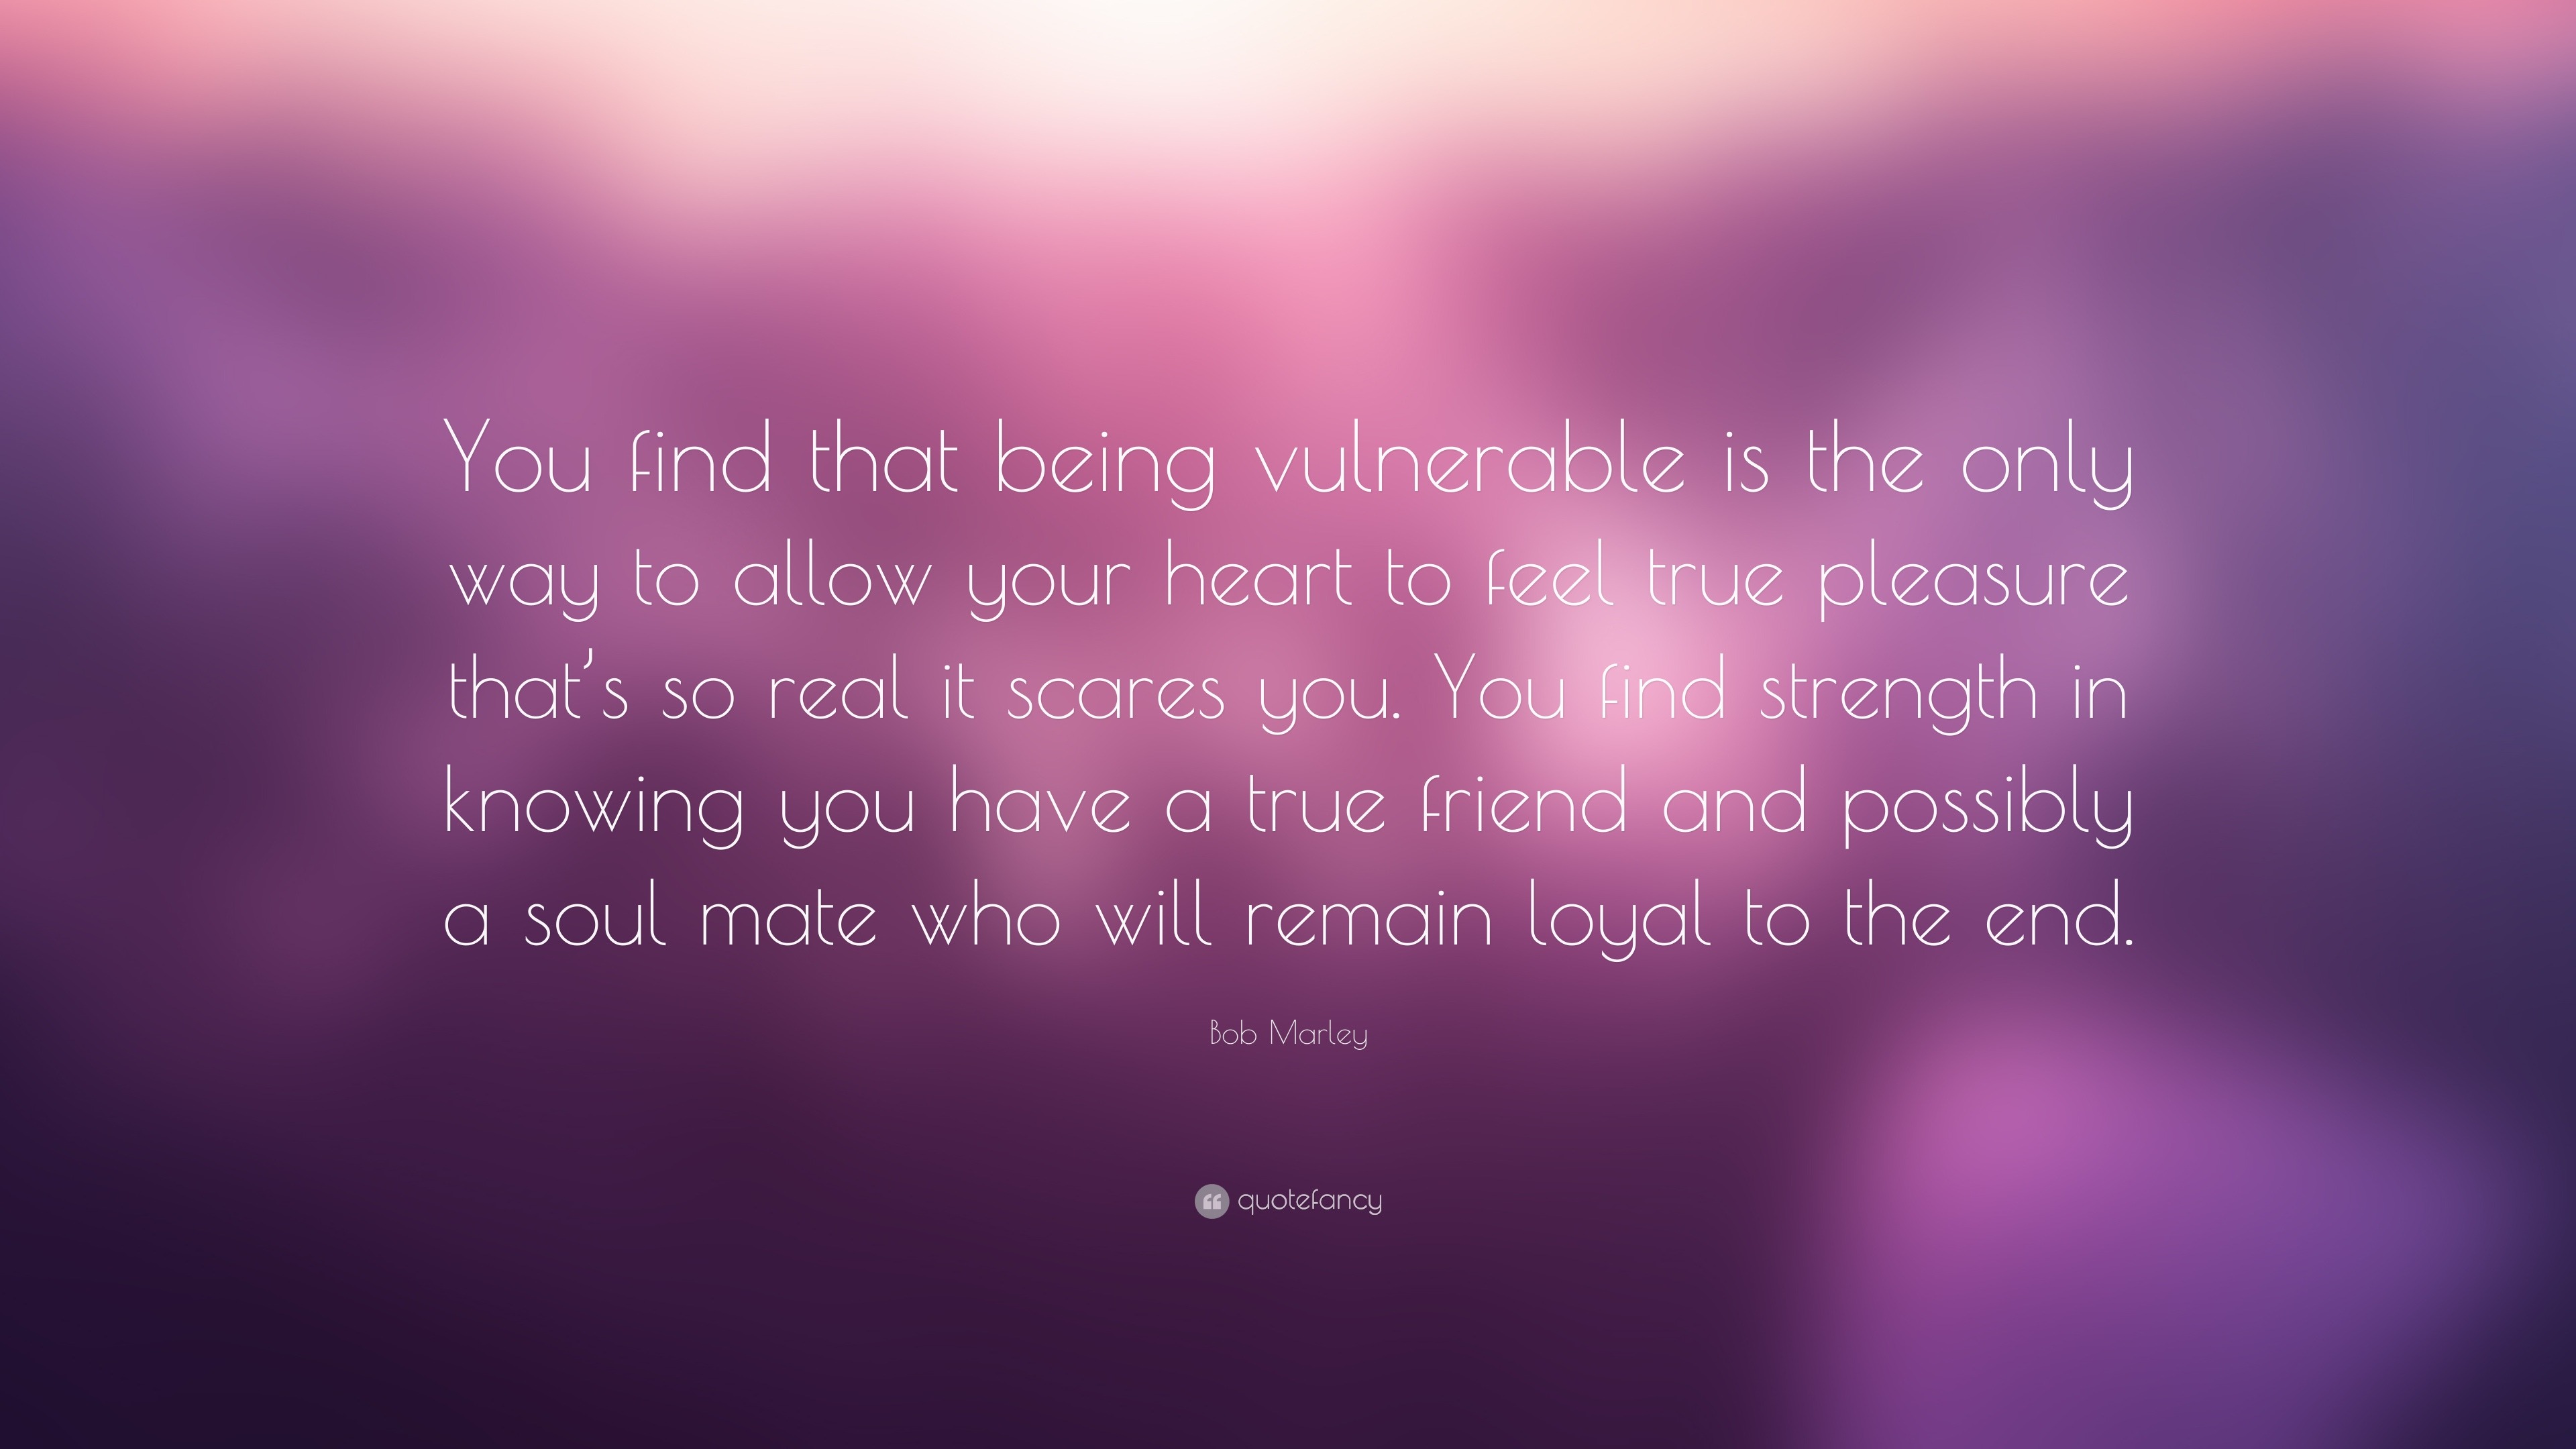 1781607 Bob Marley Quote You find that being vulnerable is the only way to